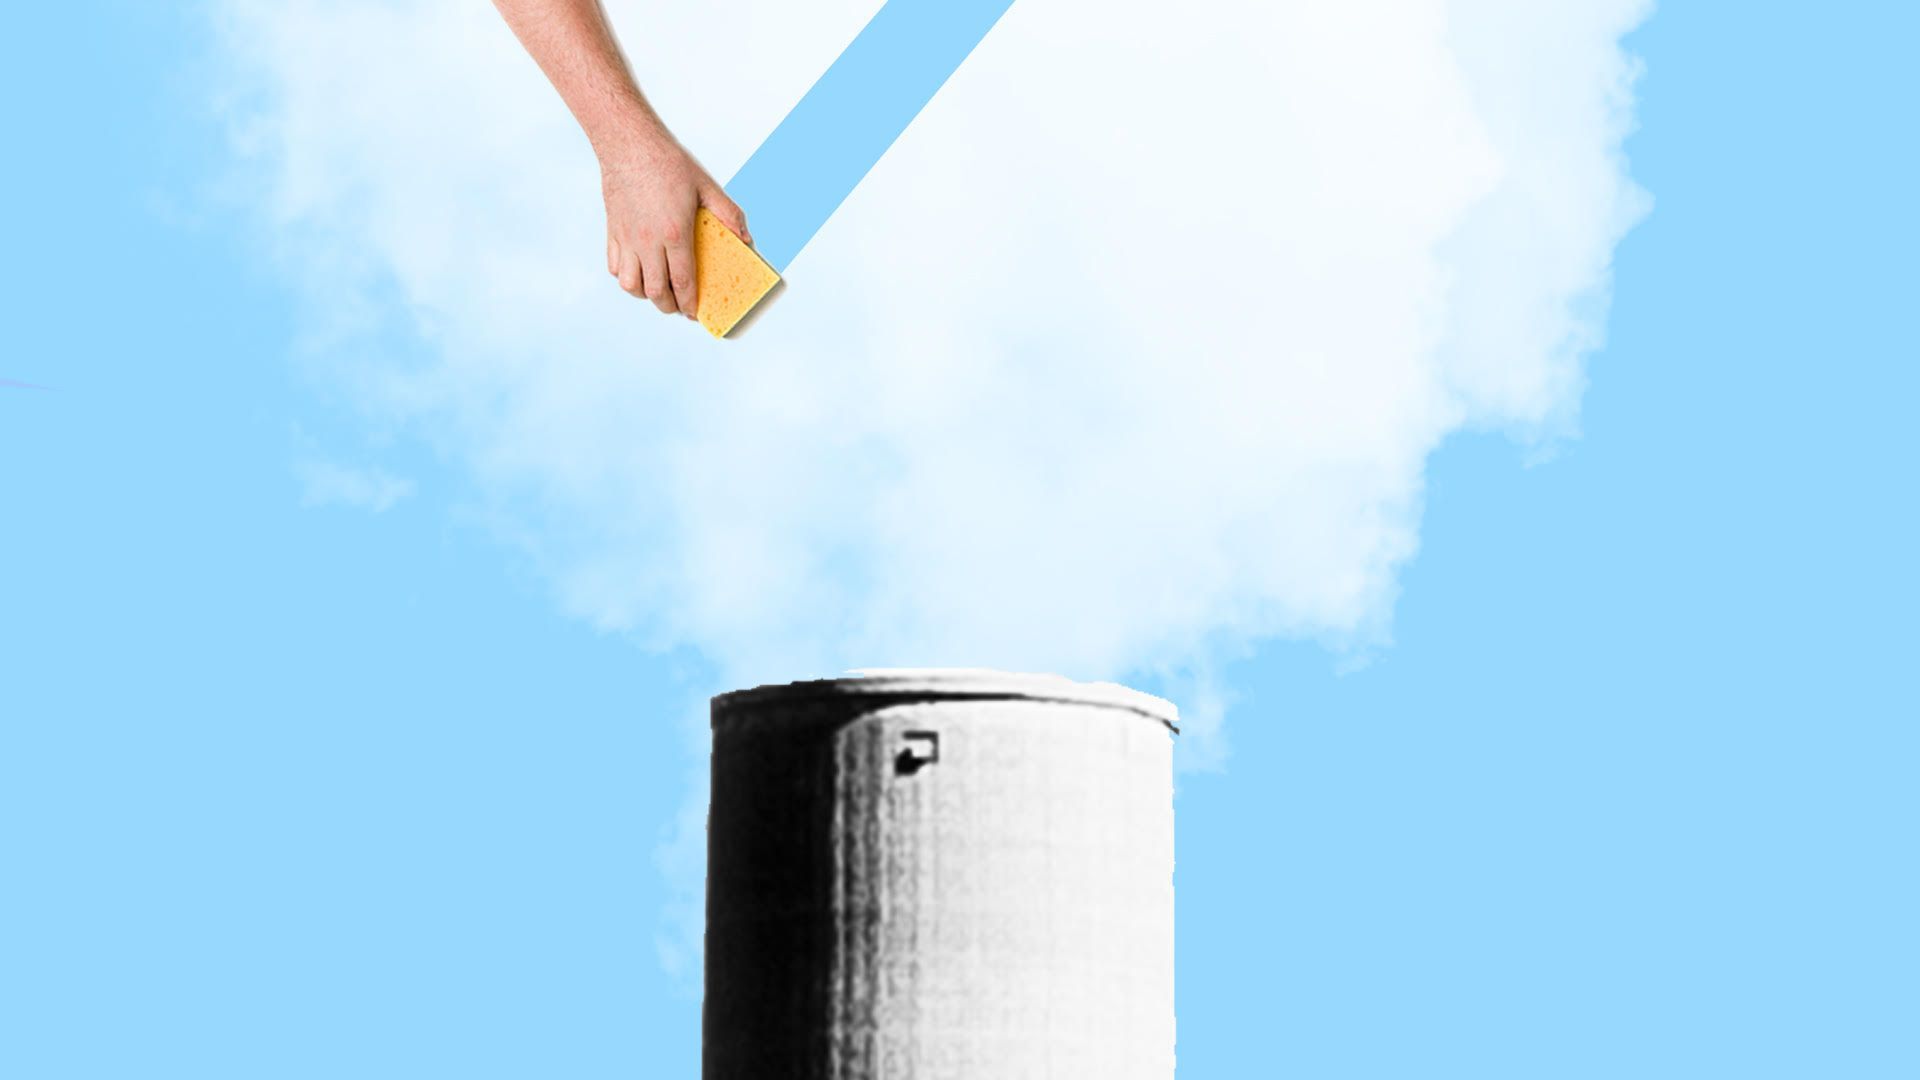 Illustration of a smokestack with pollution flowing into air, with a hand using an eraser to delete some of it